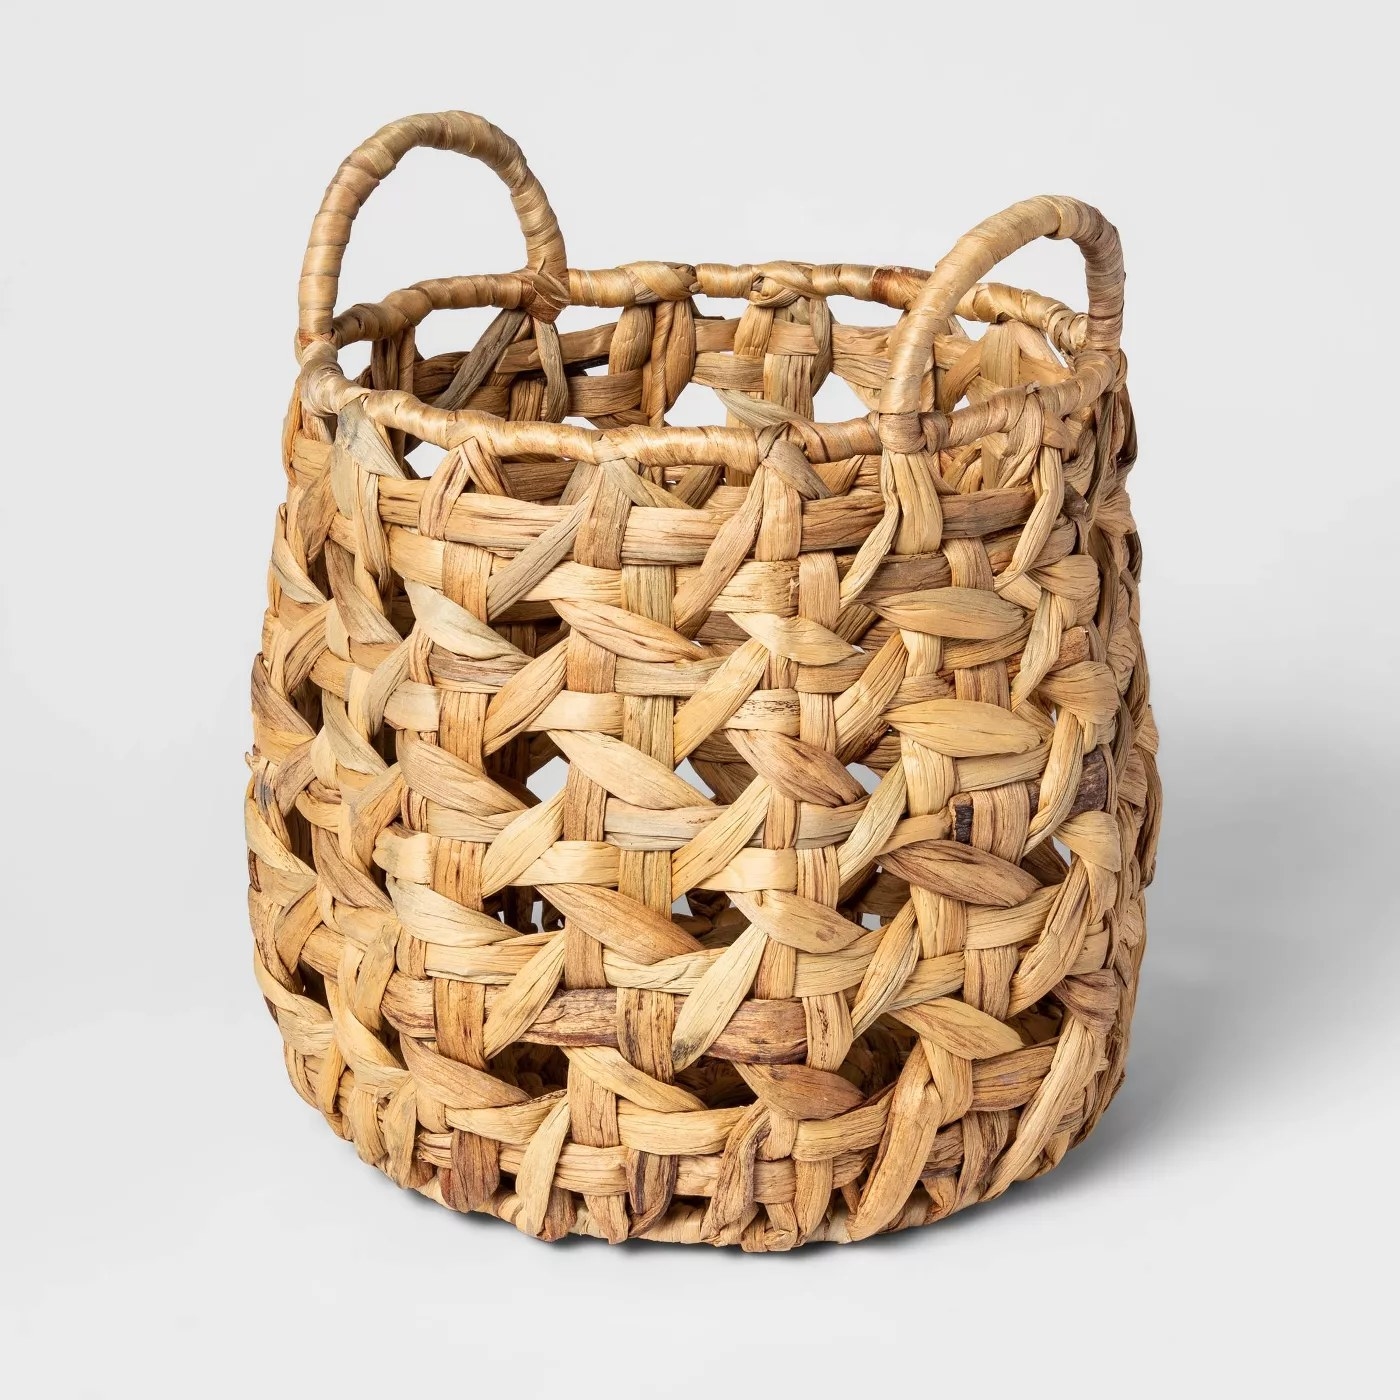 The intricately woven basket has two handles and has different tons of tan and brown throughout